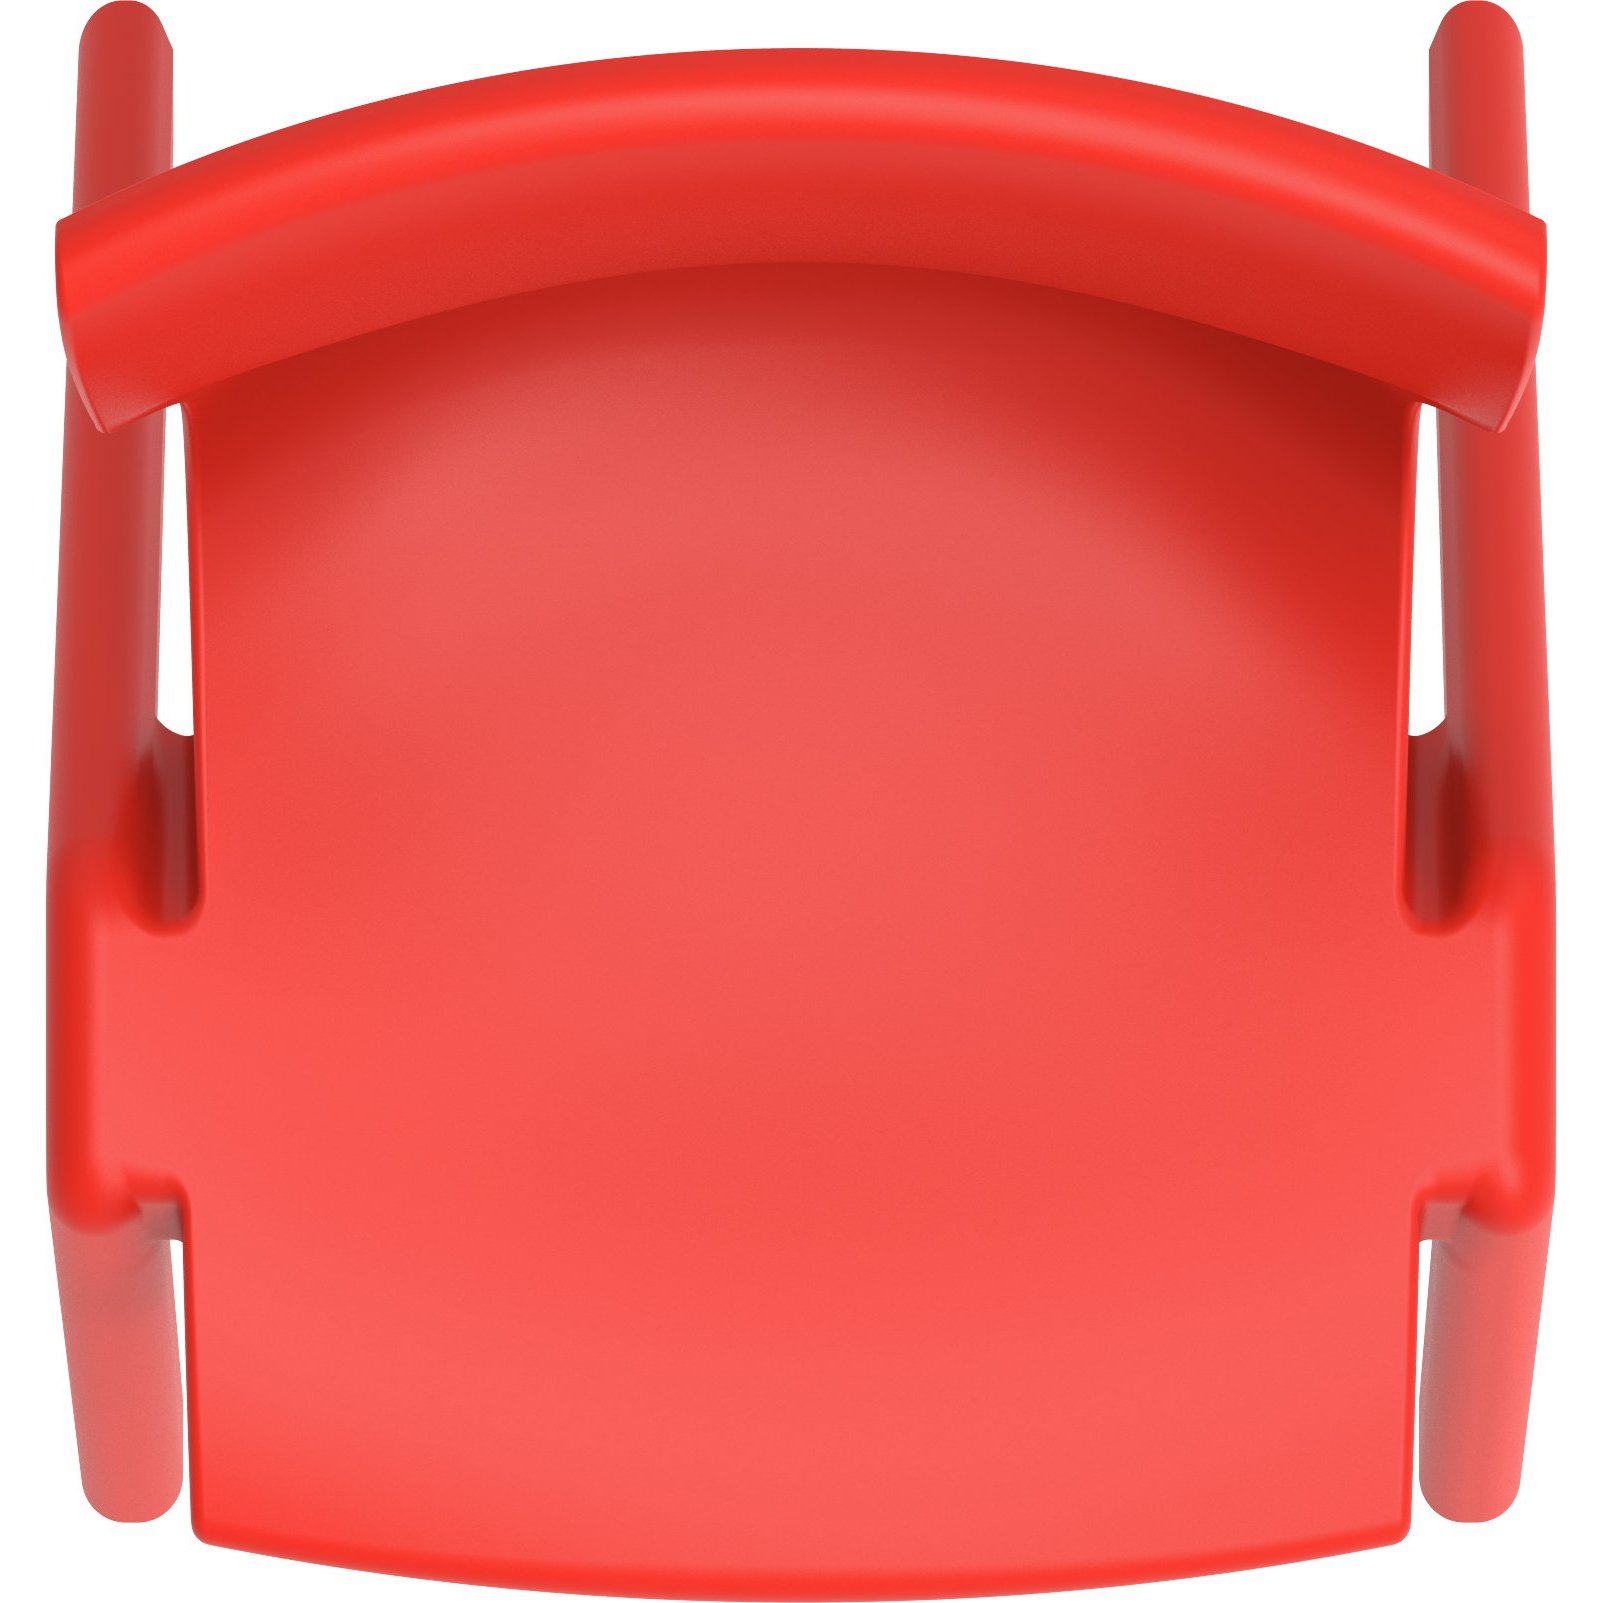 Duramax Junior Chair Duramax Junior Chair Deluxe Red